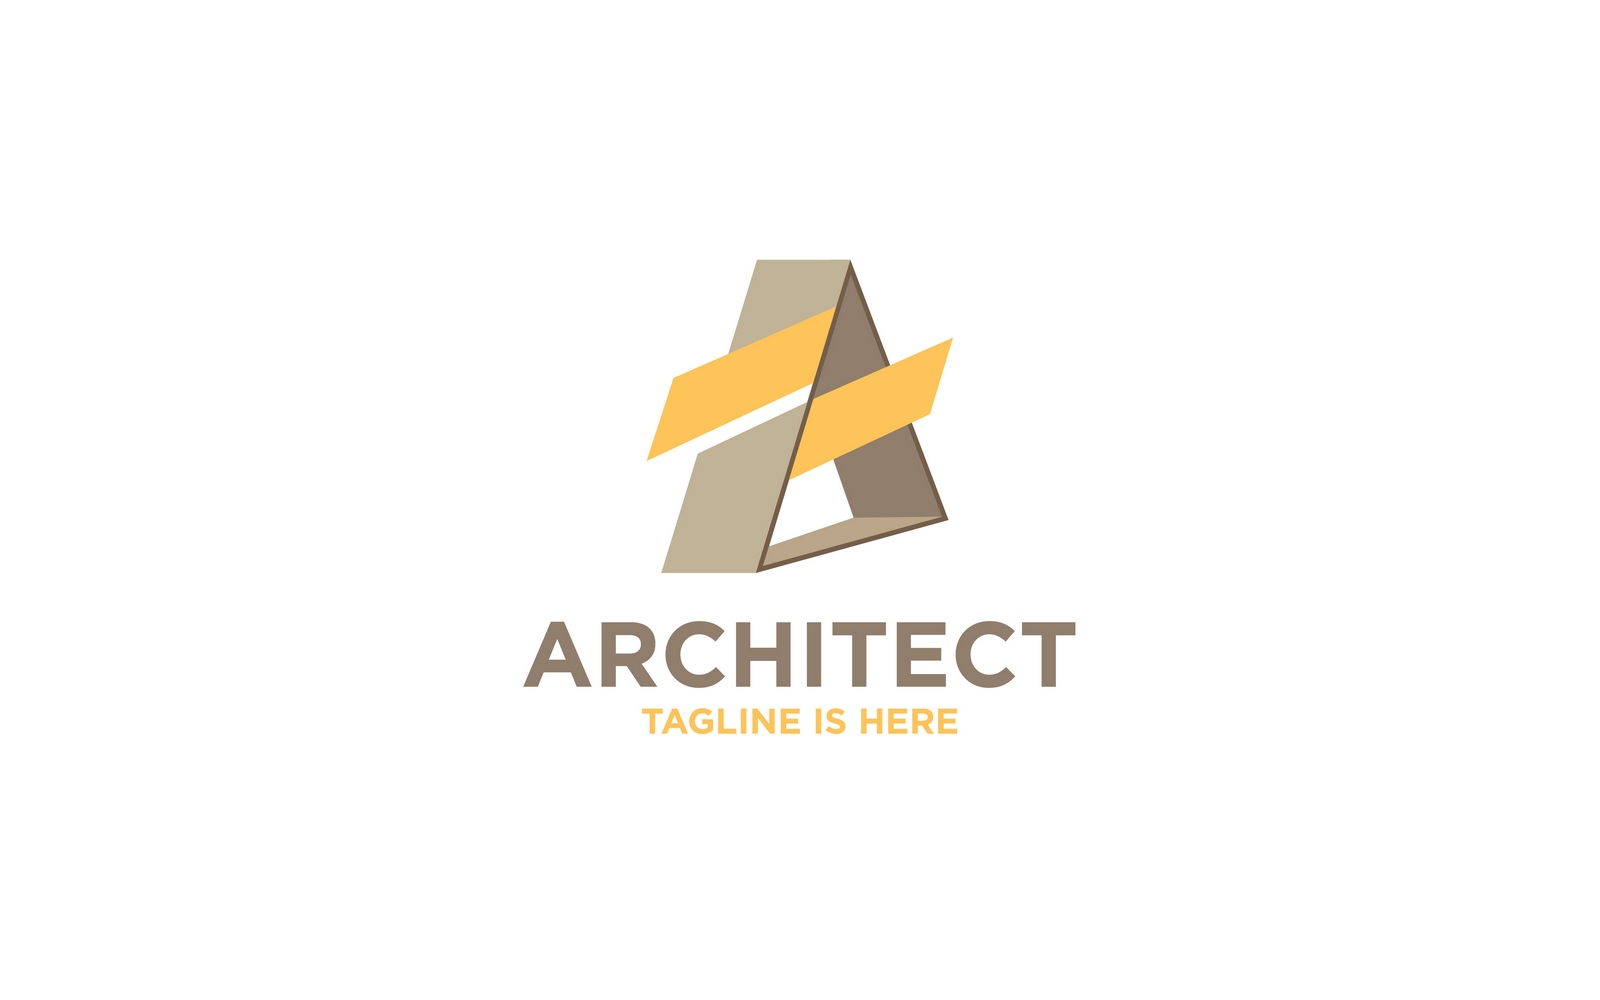 Architectural Triangle latter A Logo Template